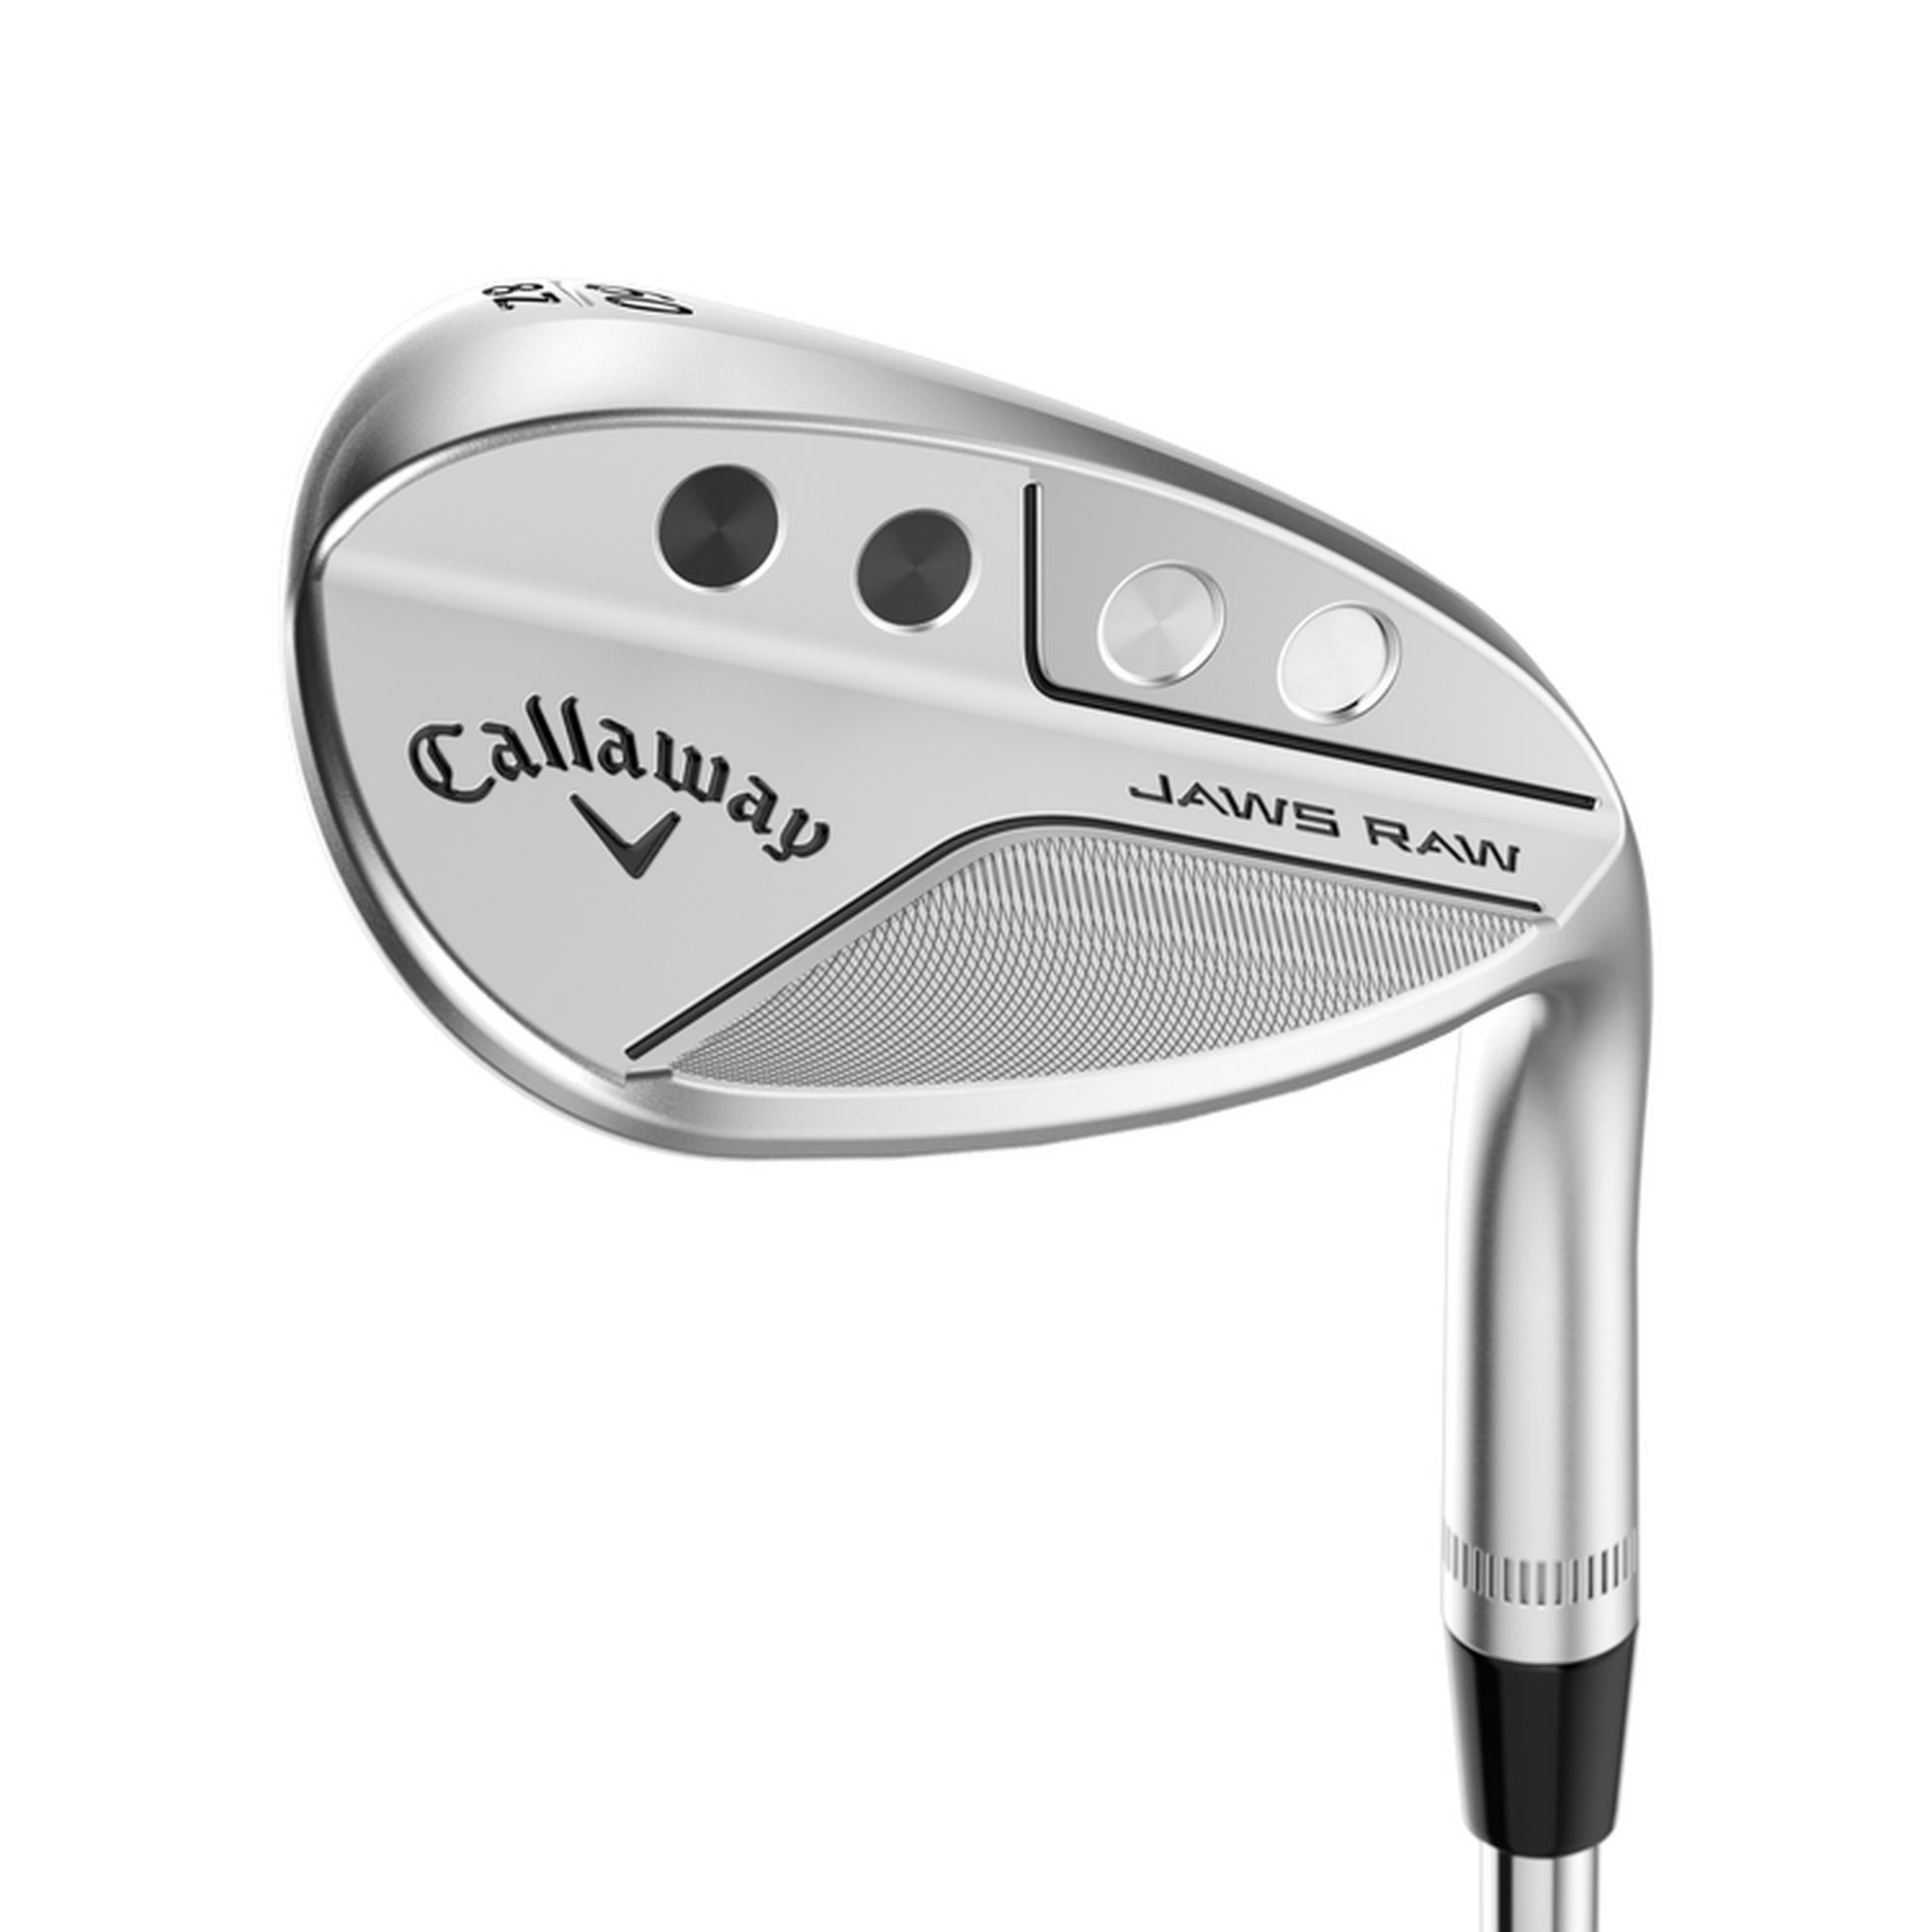 JAWS RAW Chrome Wedge with Steel Shafts | CALLAWAY | Golf Town Limited